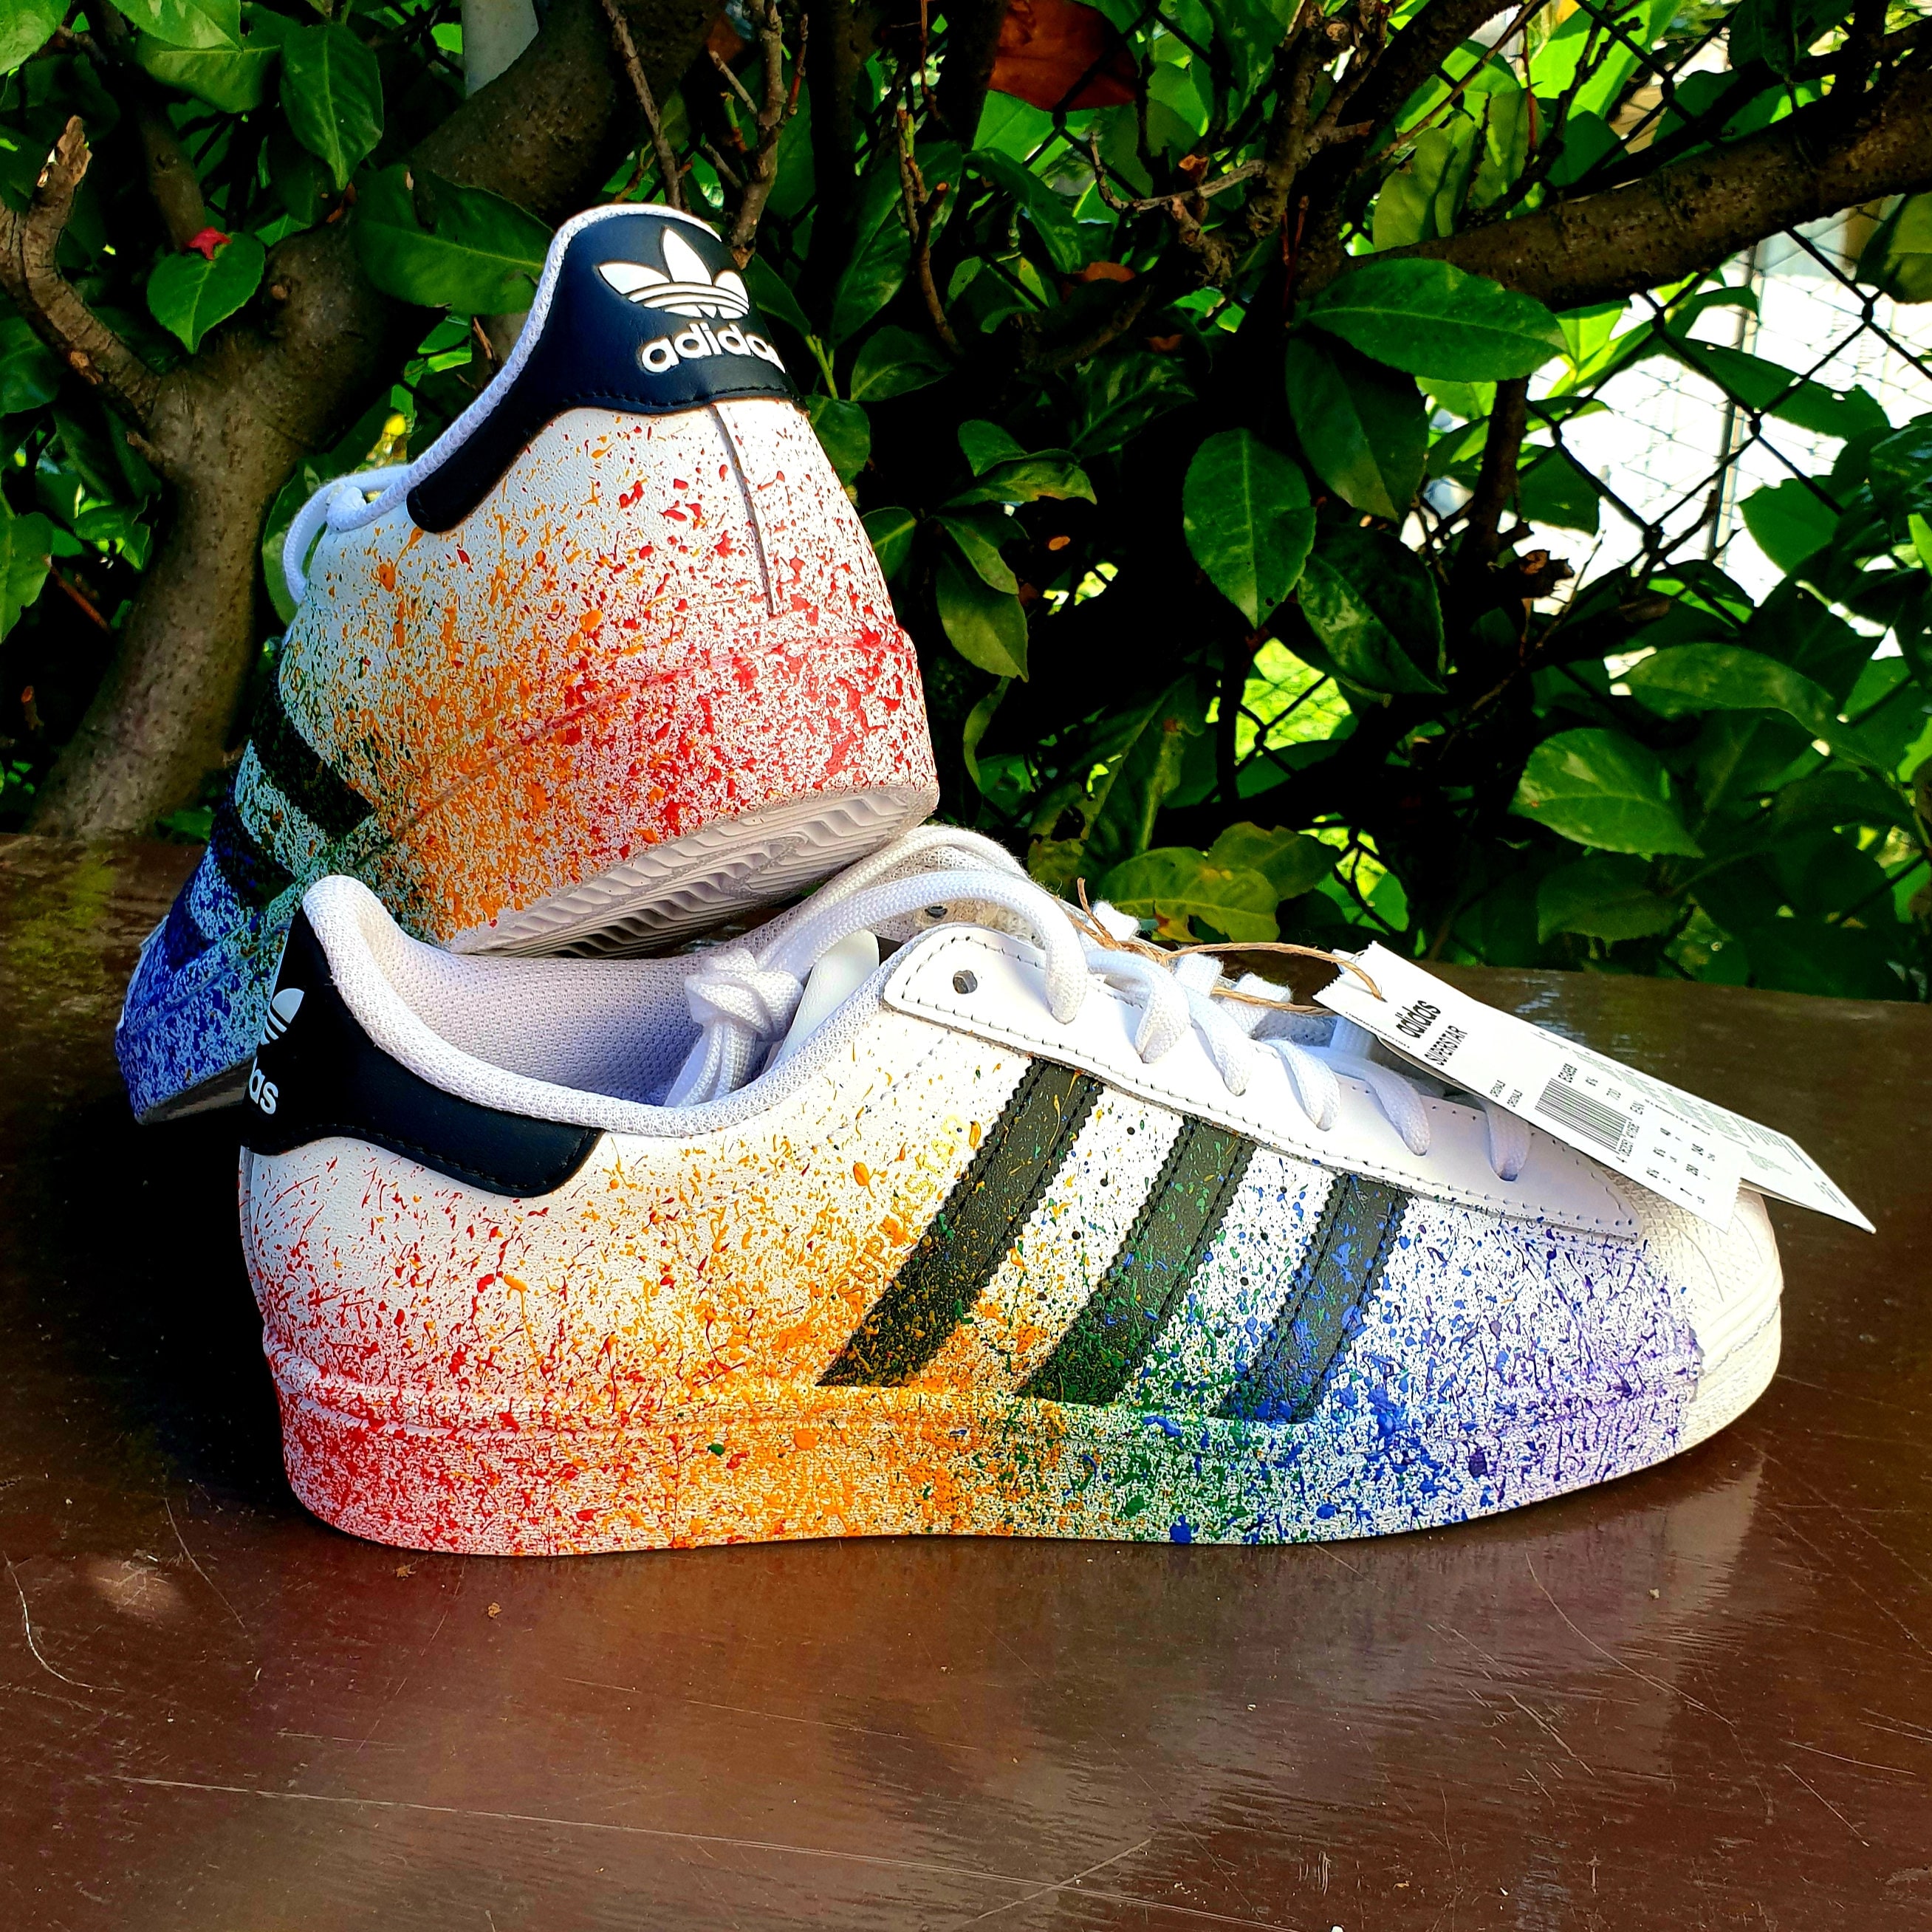 Adidas Superstar custom made, buy greek artist. perfect with all